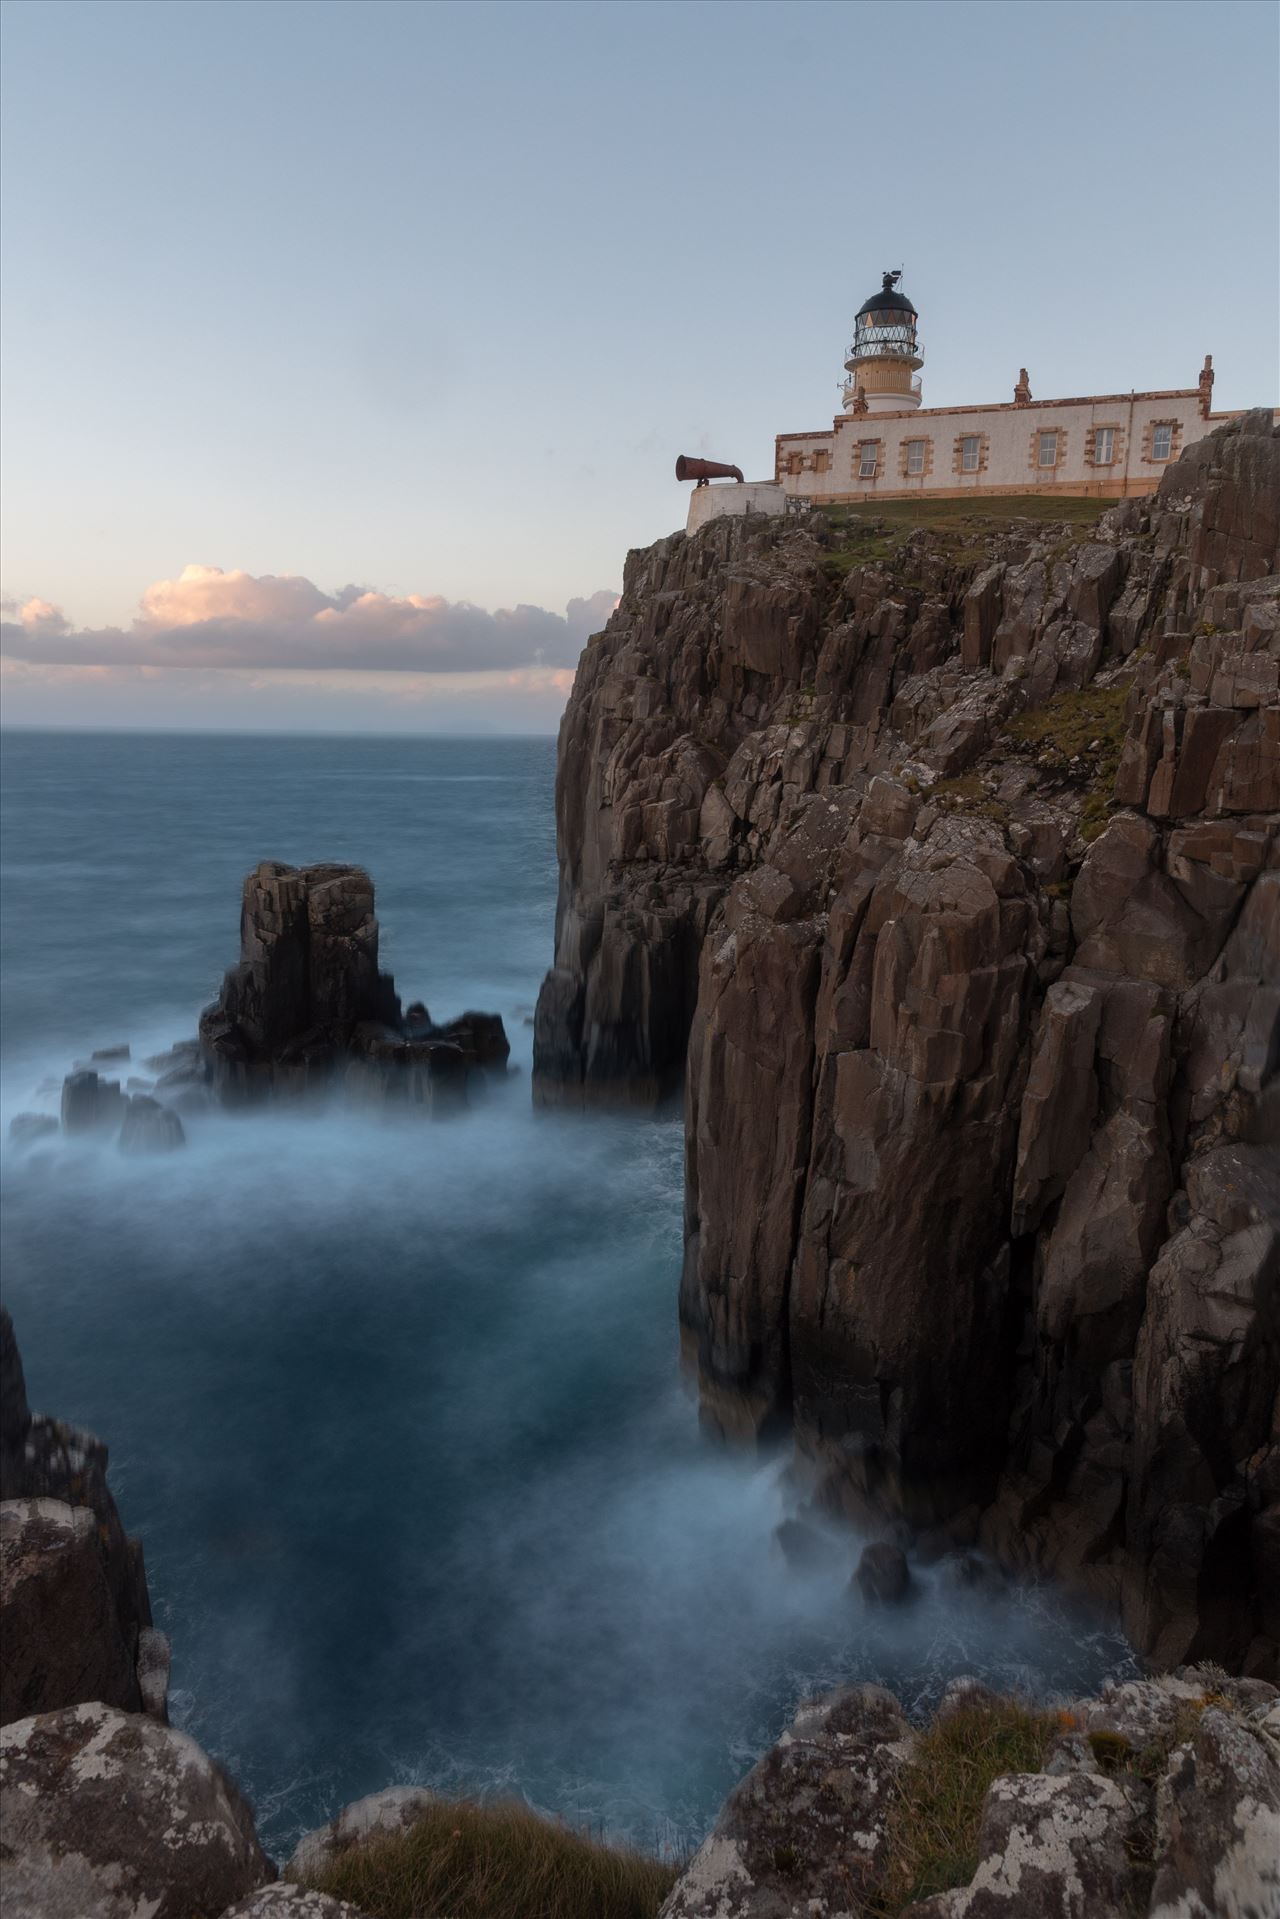 Neist Point lighthouse, Skye Neist Point is one of the most famous lighthouses in Scotland and can be found on the most westerly tip of Skye near the township of Glendale. by philreay